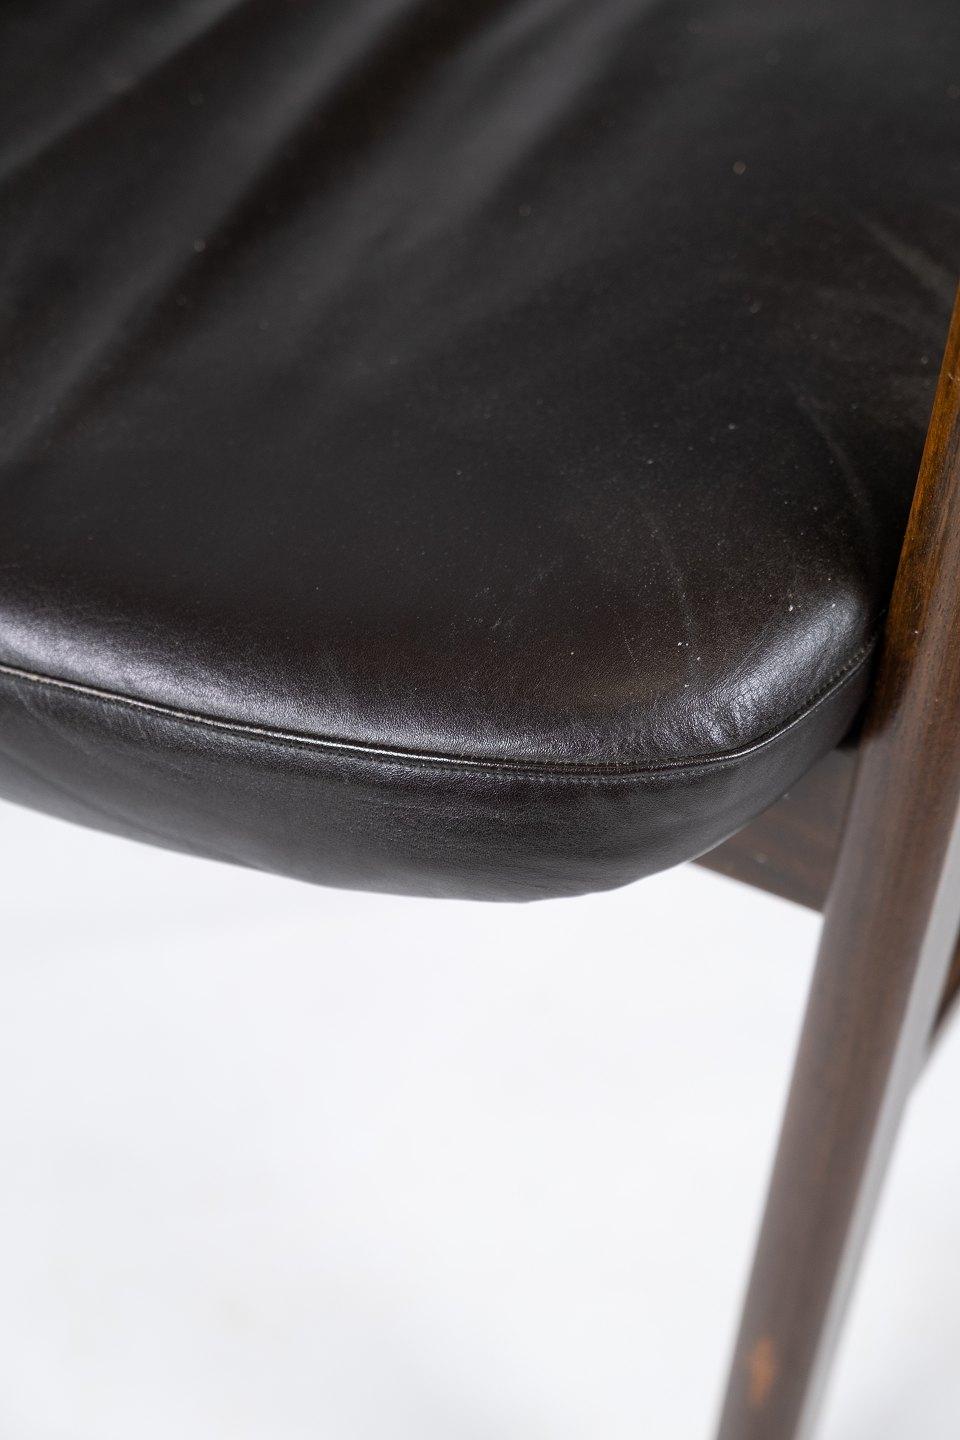 Armchair in rosewood and black leather of Danish design from 1976. The armchair is in great vintage condition.